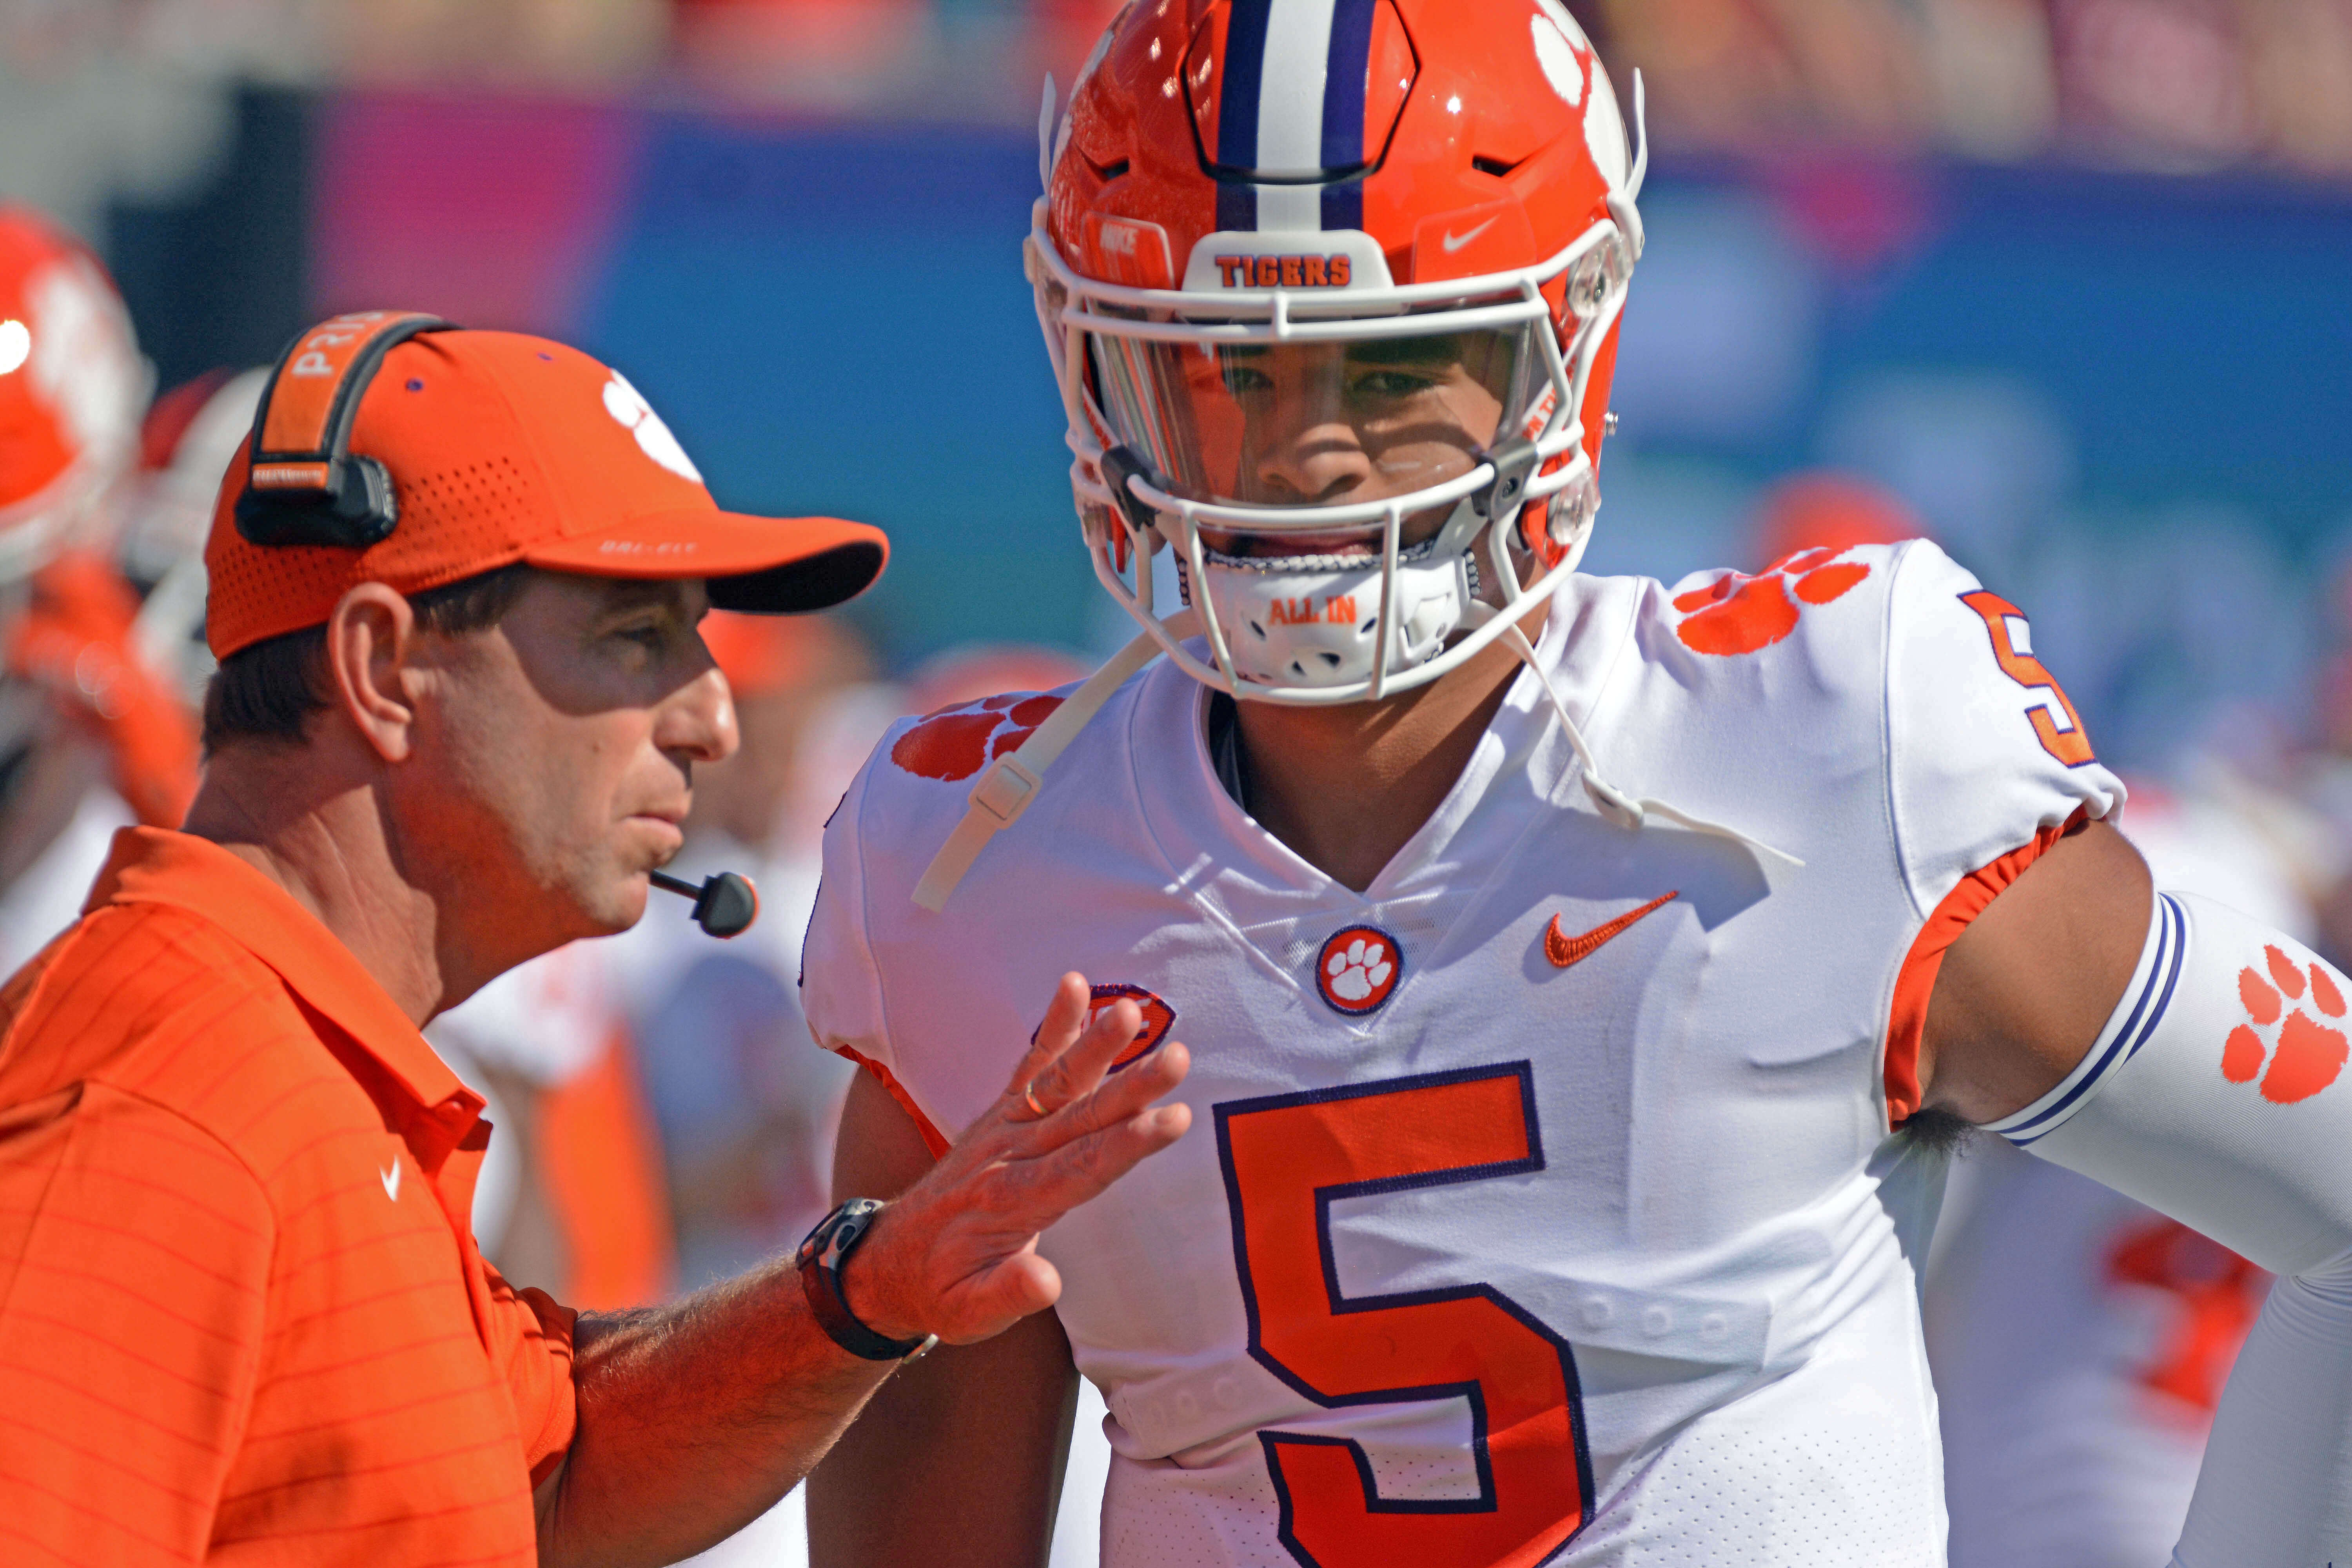 ACC 2022 Odds, Predictions, and Betting Preview: Clemson is Set to Reclaim ACC Throne